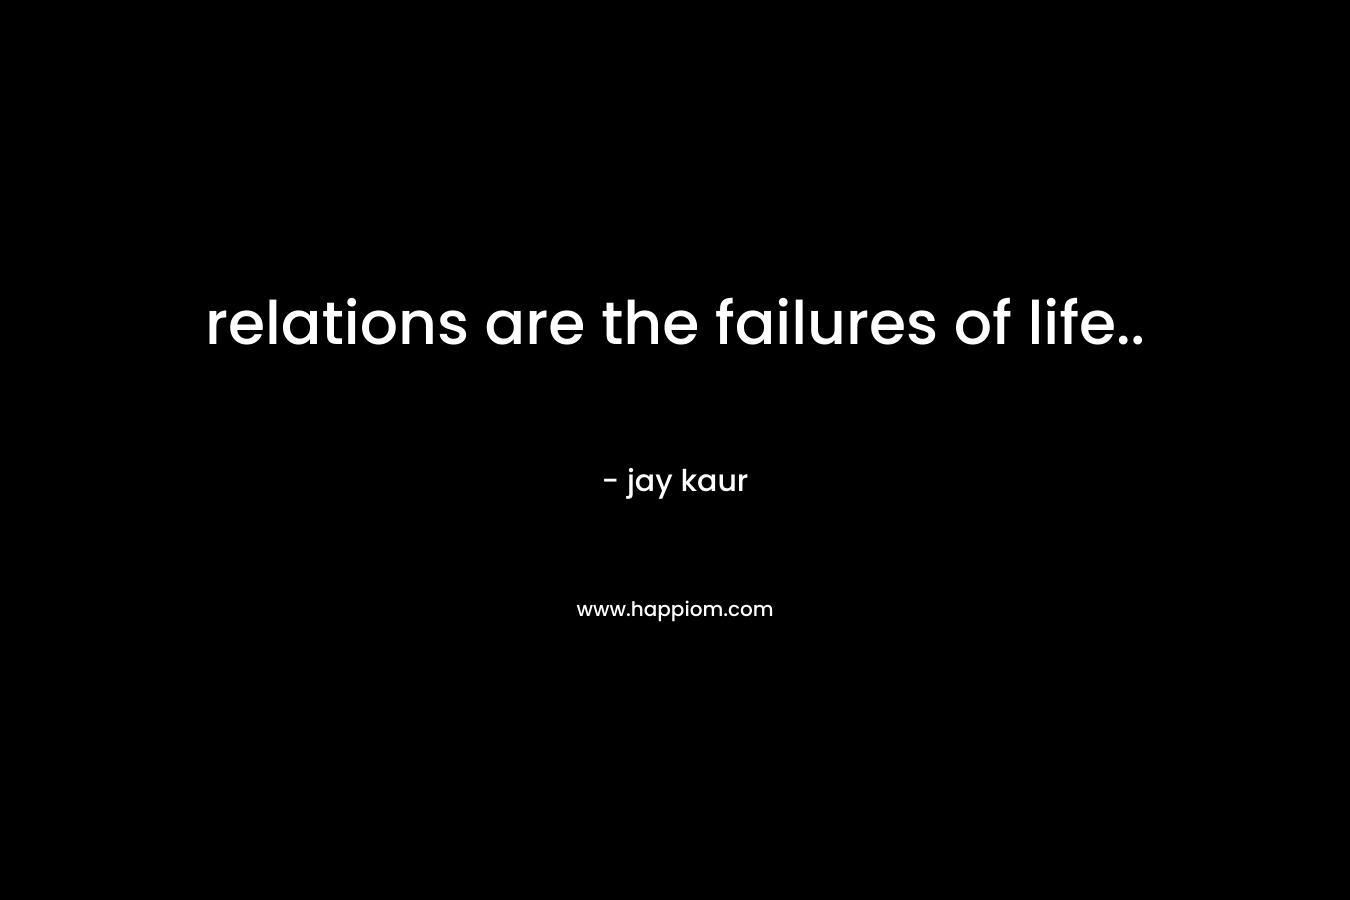 relations are the failures of life..